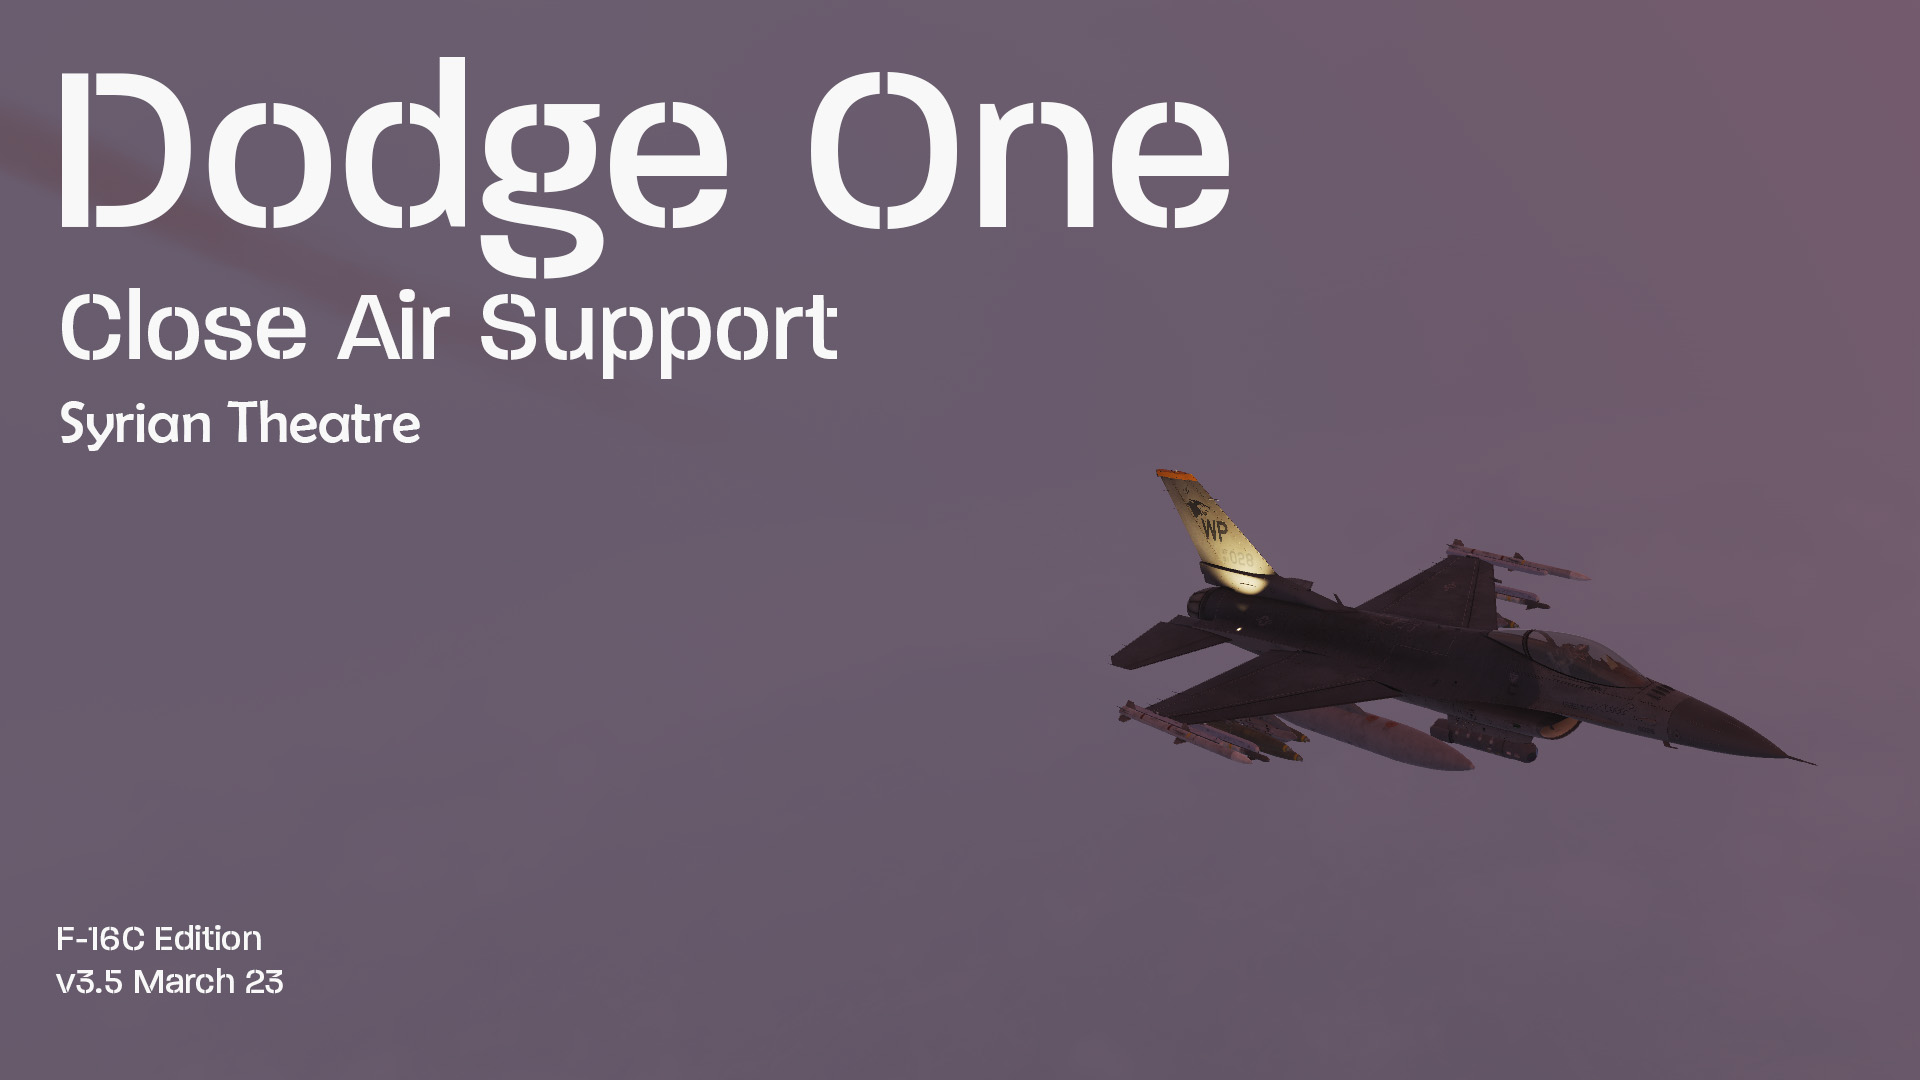 Dodge One v3.5 - CAS in the Northern Syrian theatre for single or multiplayer F16 Viper